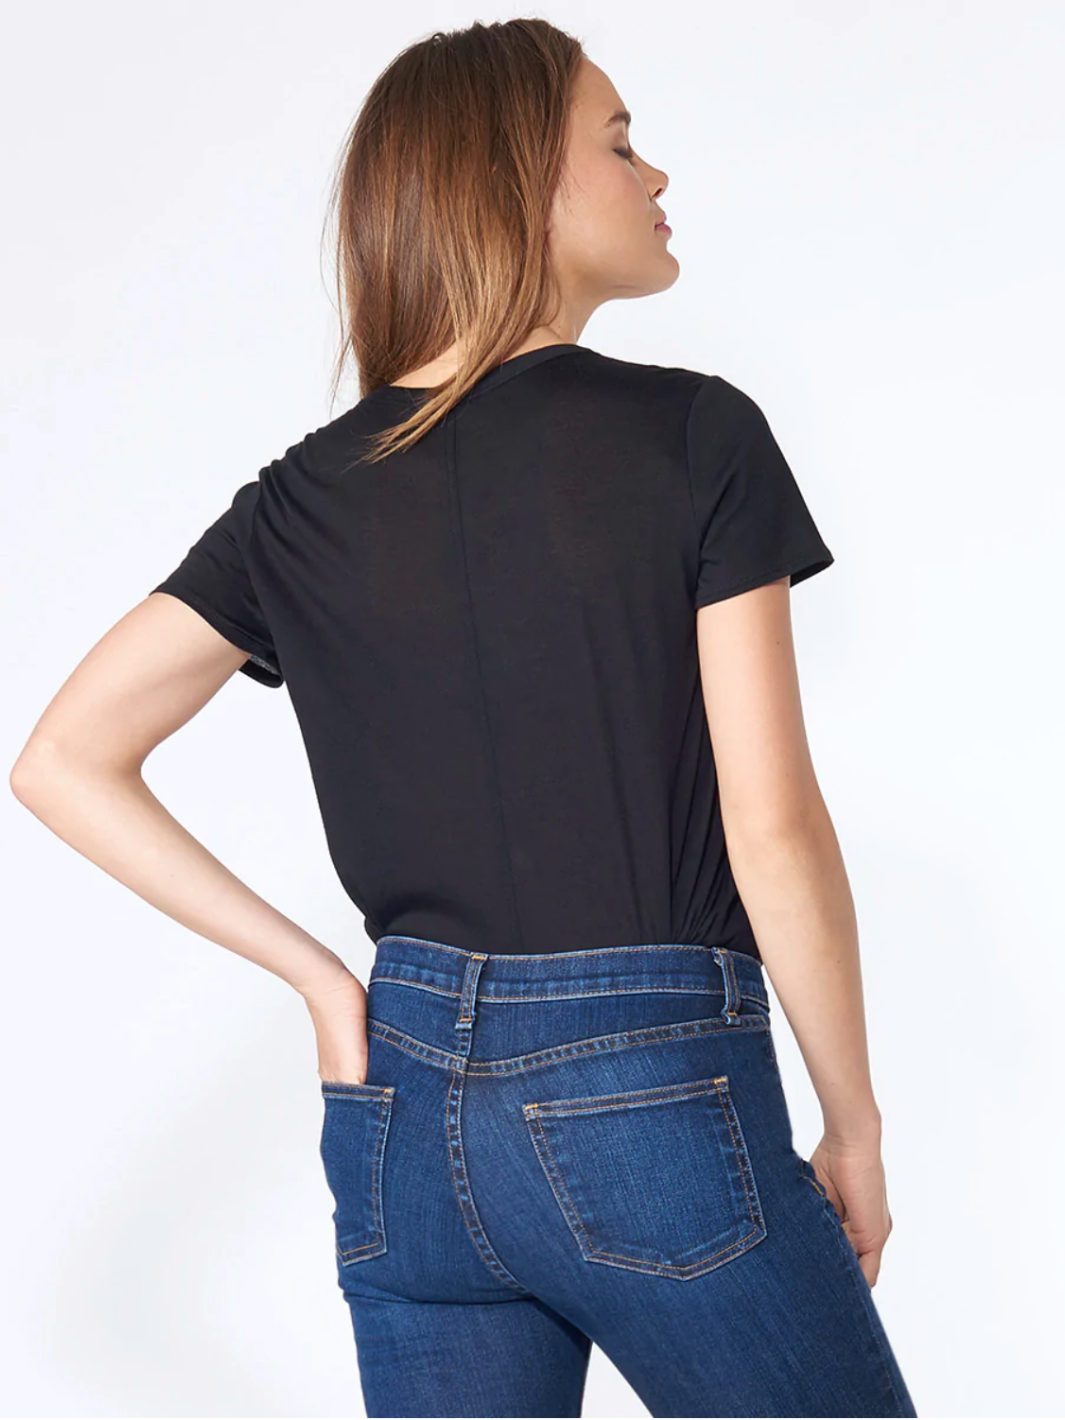 CINDY V-NECK TEE IN BLACK - Romi Boutique